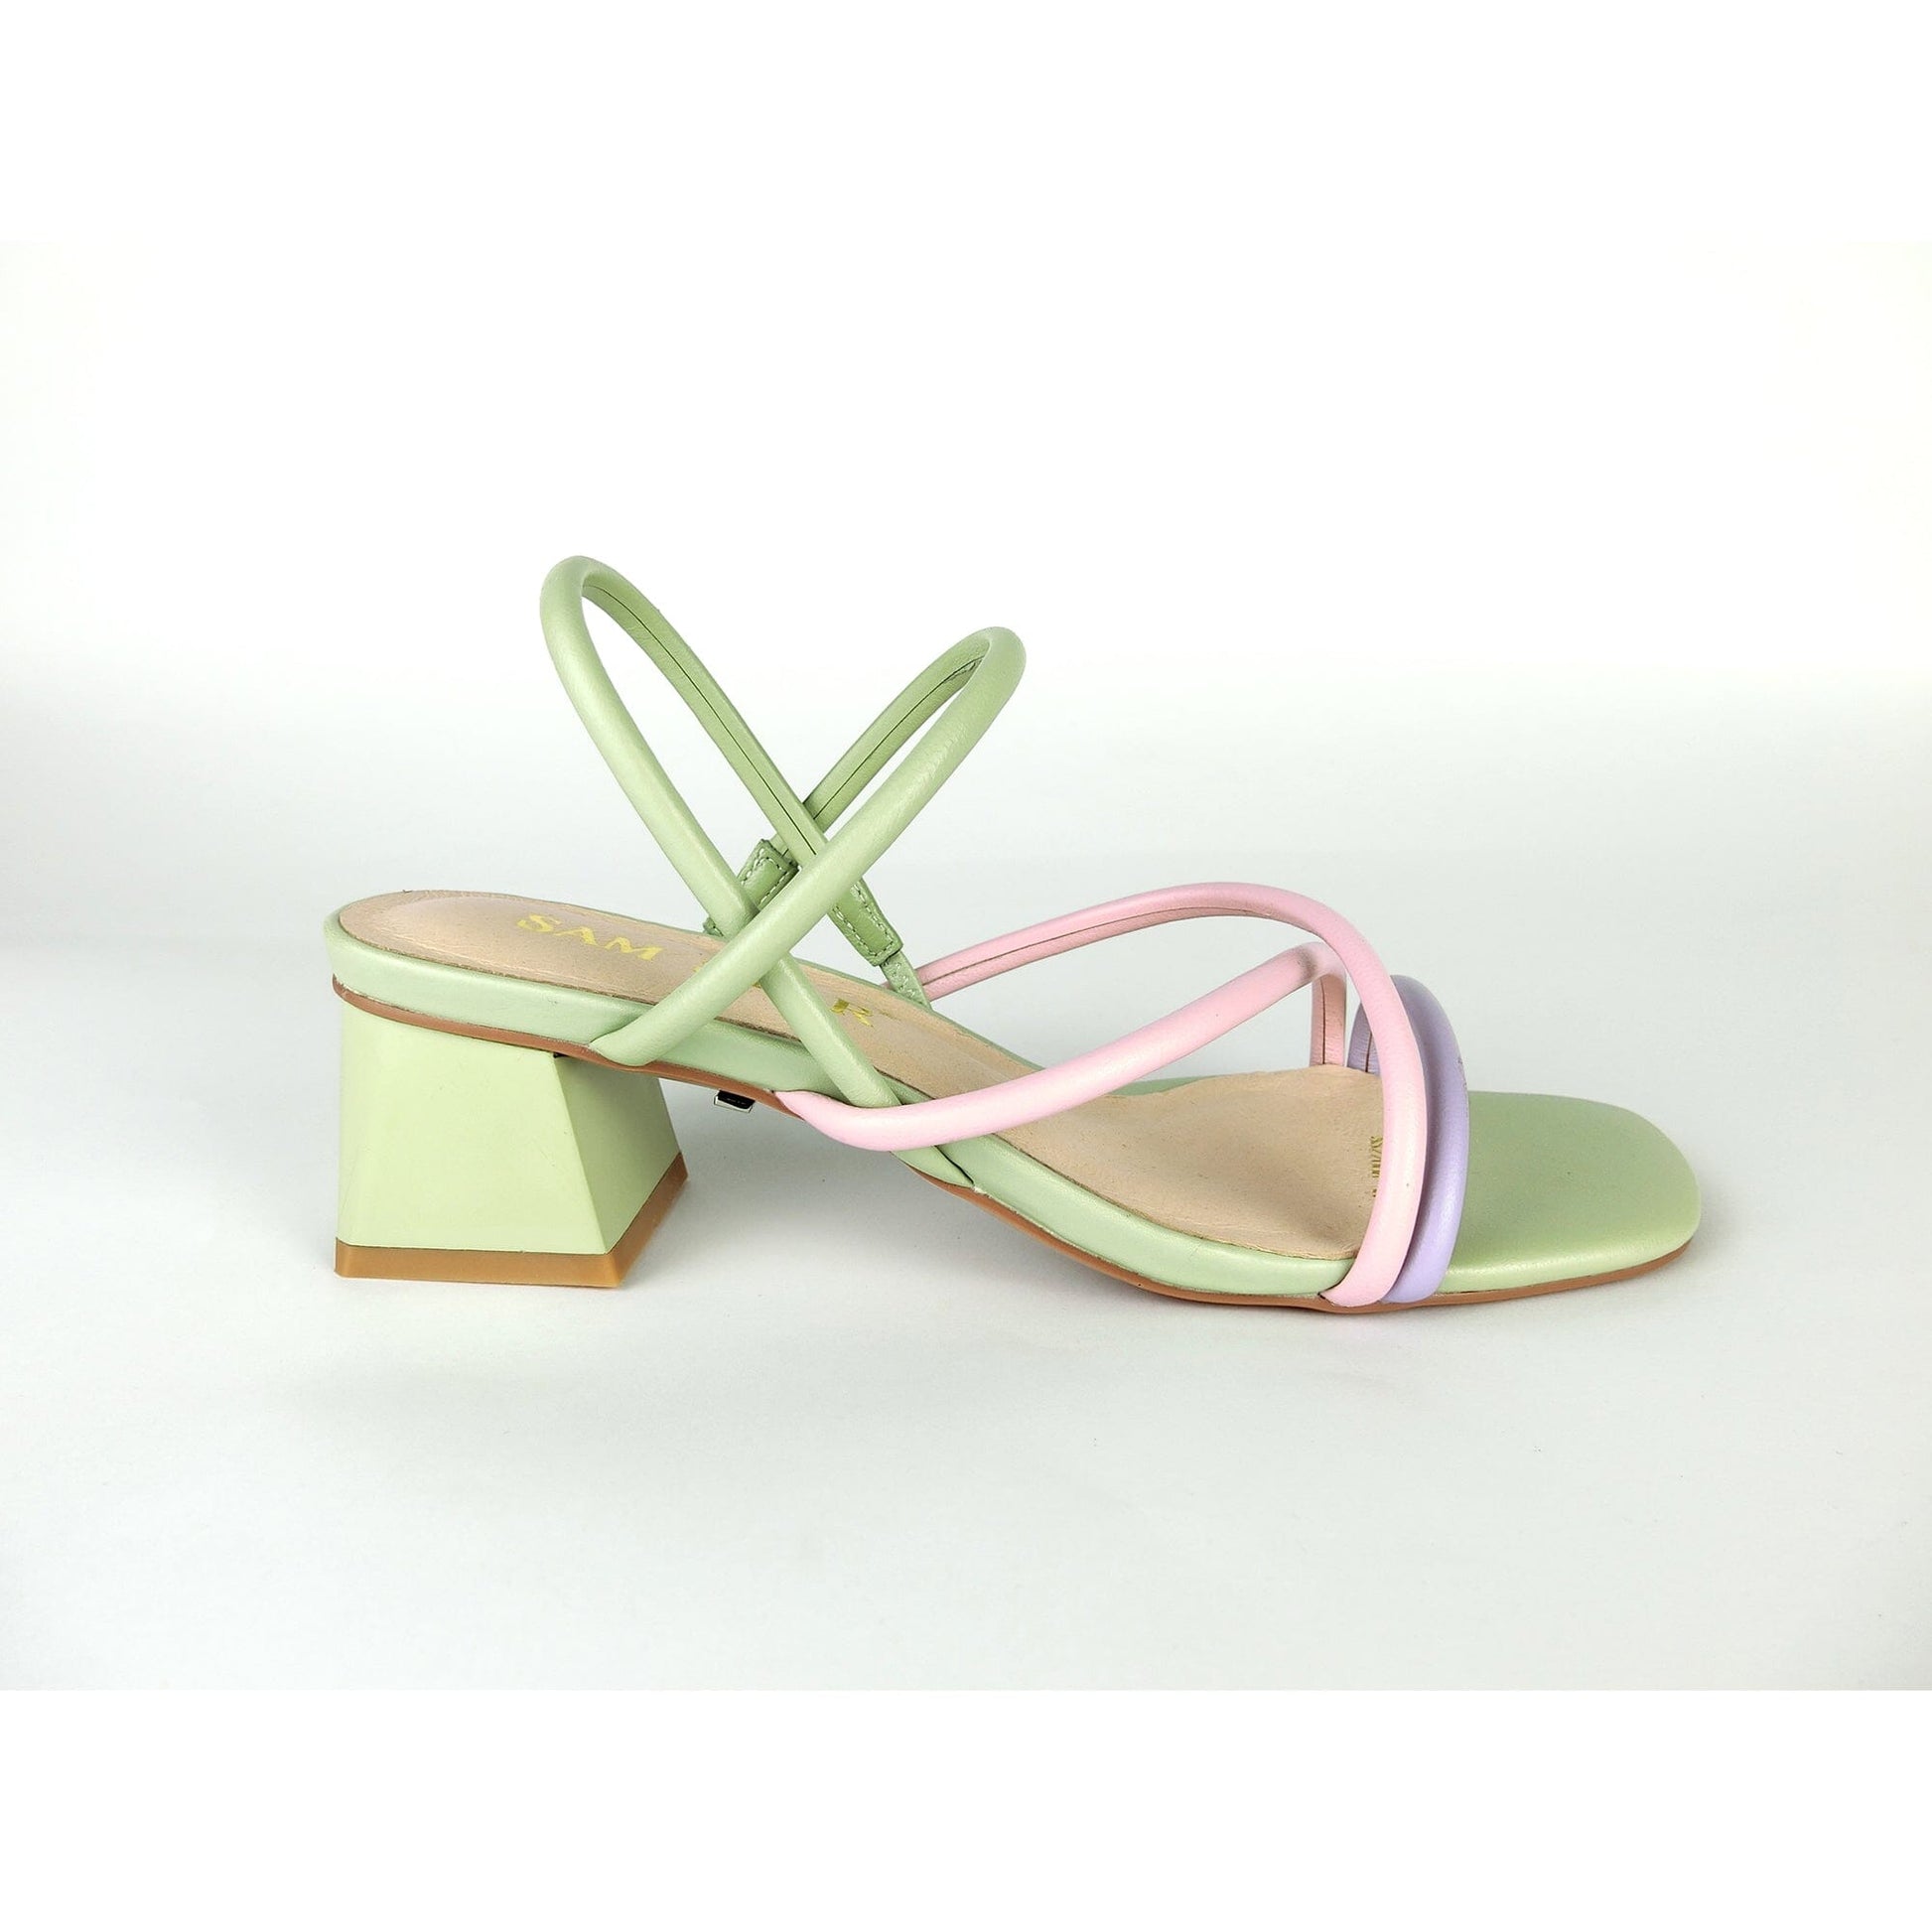 SS22007 Genuine leather strappy block heel sandals in mint, pink and lilac sandals Sam Star Shoes Mint.PInk.Lilac 37/4 